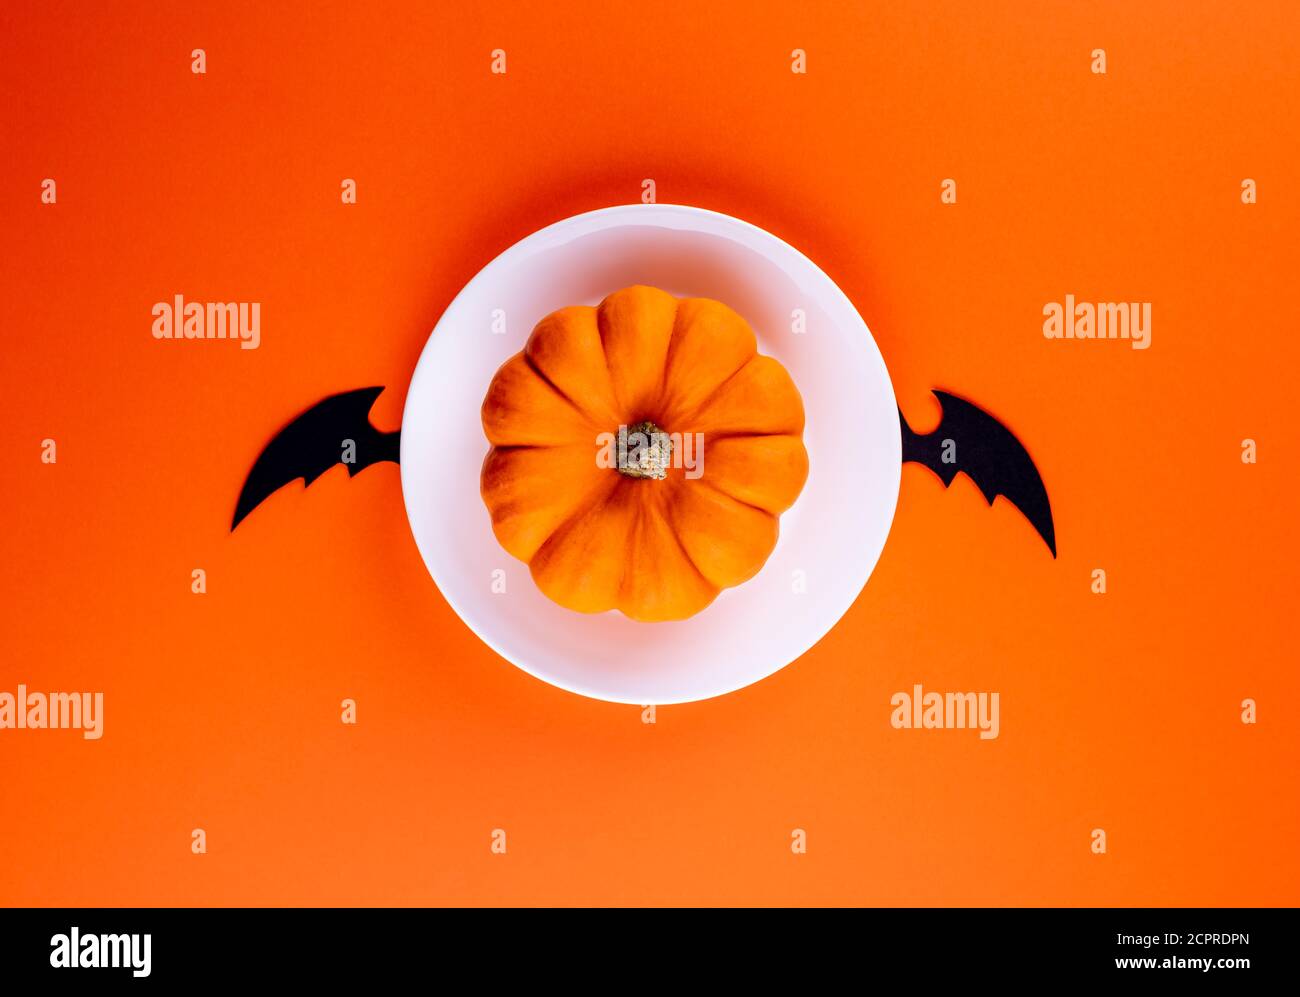 Whole raw orange pumpkin on white round plate with hand carved black bat wings in center of horizontal orange paper background. Copy space. Creative f Stock Photo